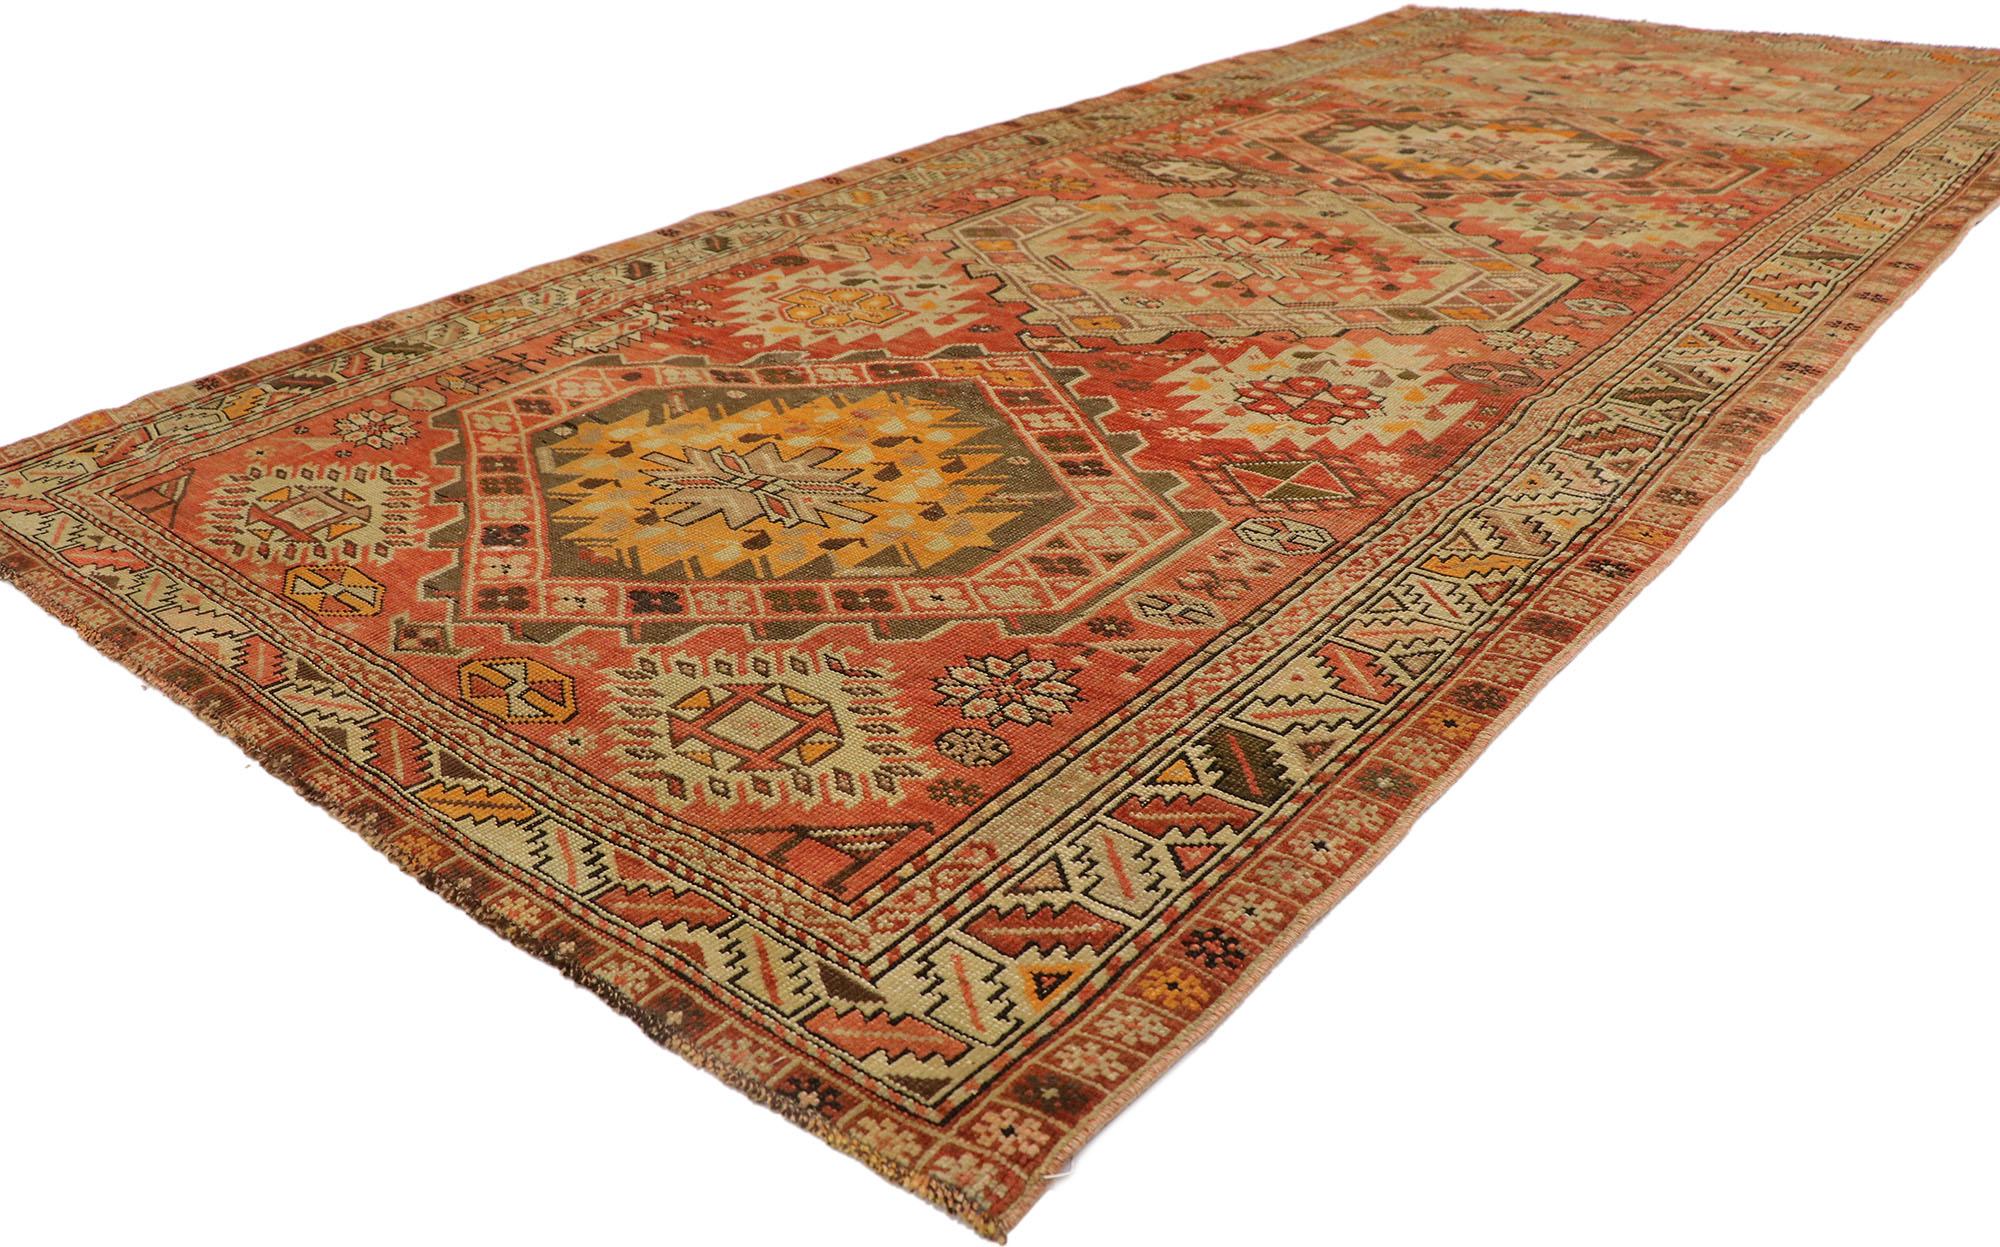 ​53655 Vintage Turkish Oushak Rug, 04'09 x 10'02.
​Behold the nomadic enchantment and tribal flair imbued in this hand knotted wool vintage Turkish Oushak rug. Its woven splendor showcases a mesmerizing geometric pattern and bold earthy color